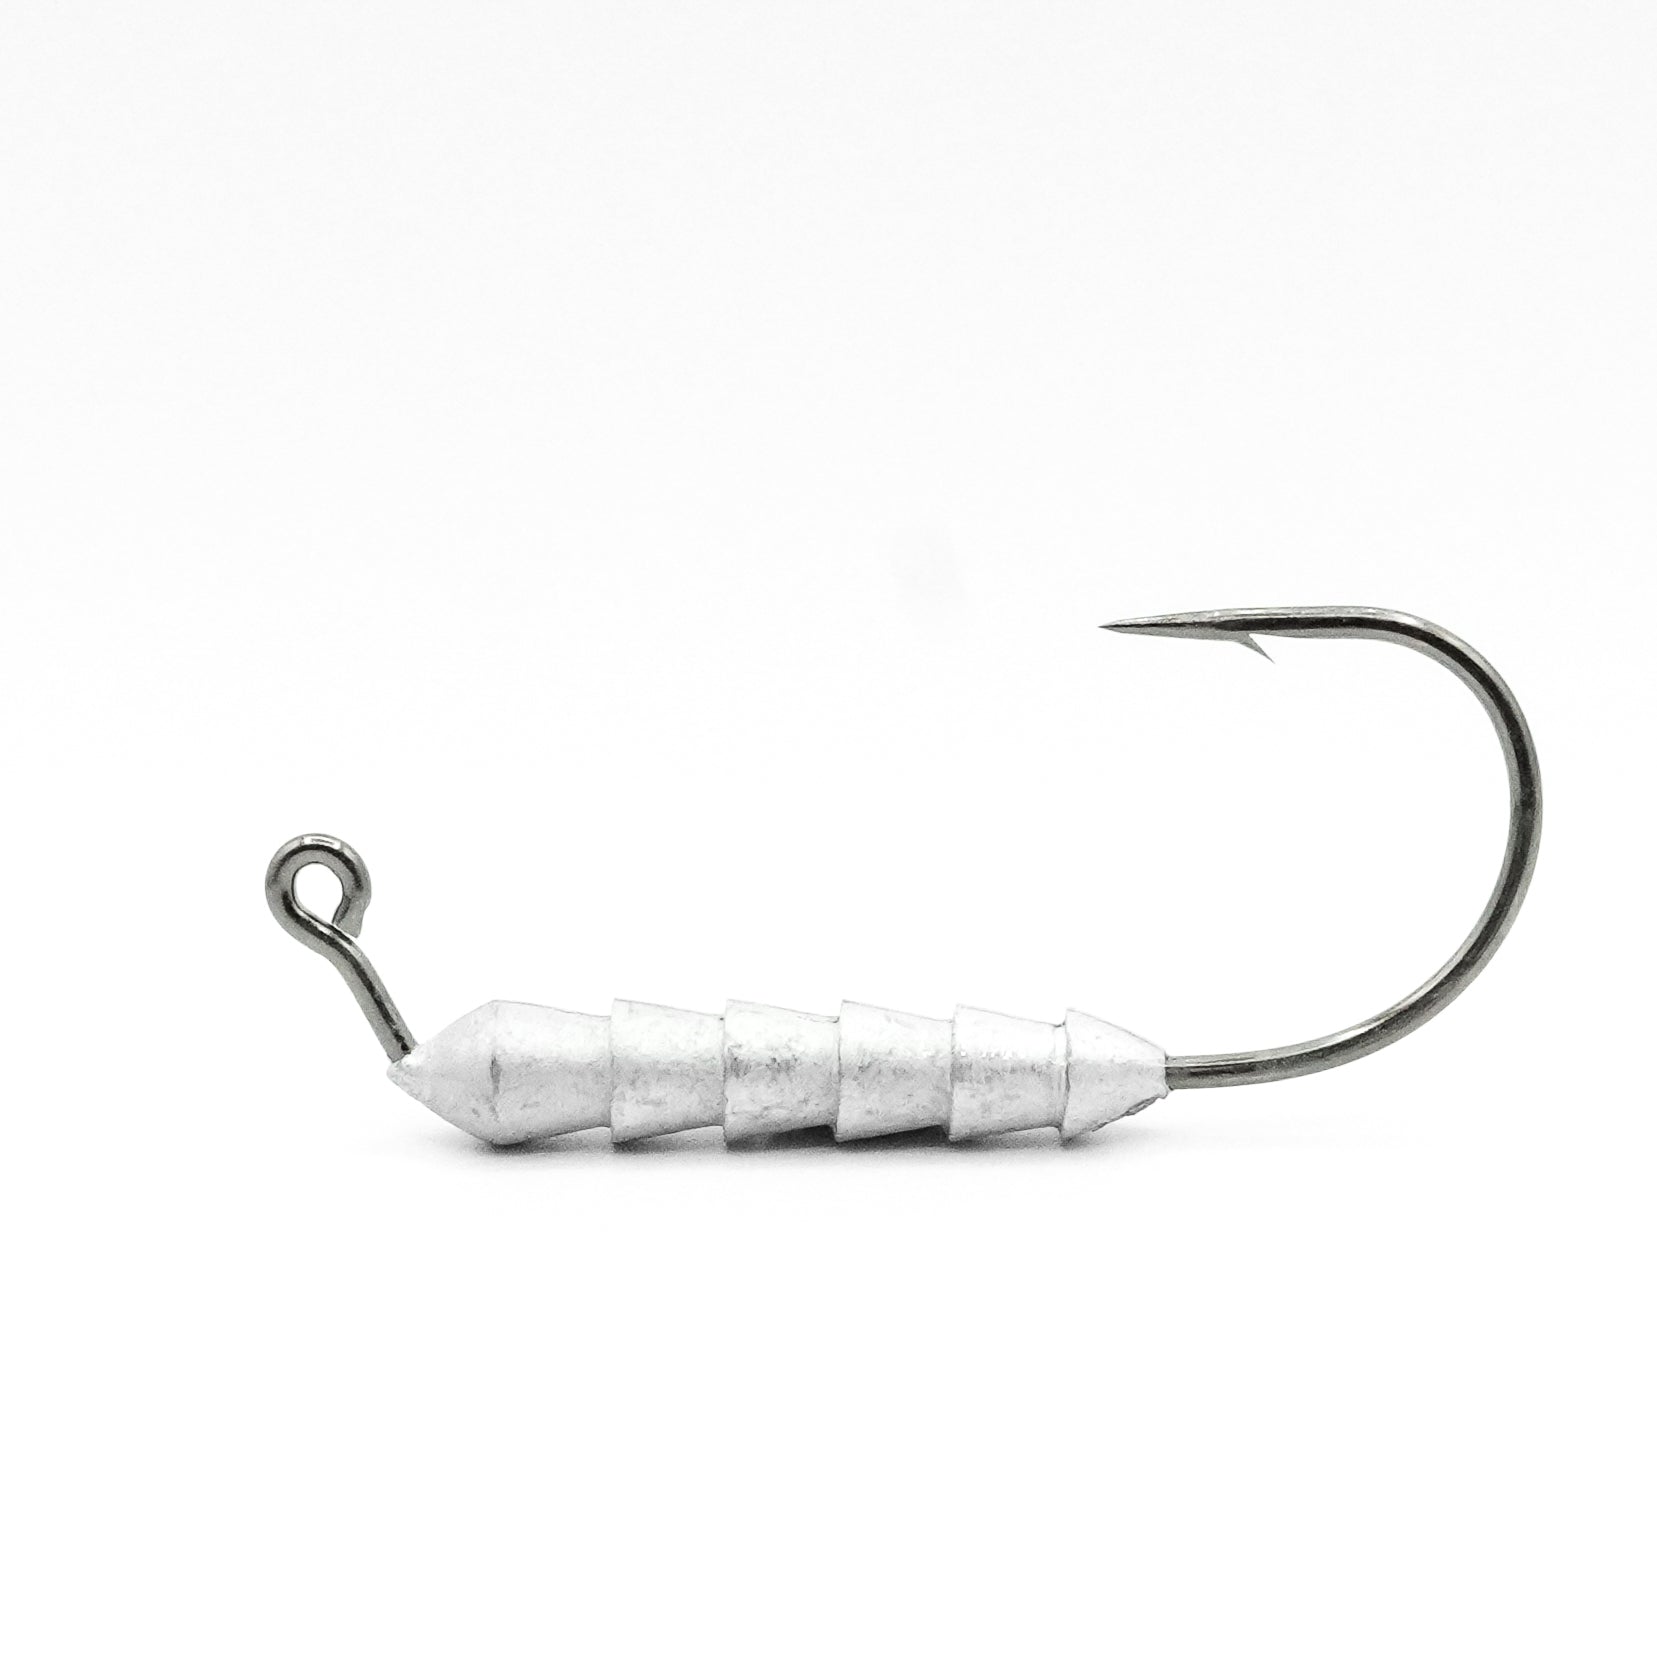 Fishing Hooks RUNCL 40 Lightweight Accessories With Slots Sleeves Tool  Durable Protector Caps Out Hook Cover Safety Treble 230609 From Ren05,  $9.07